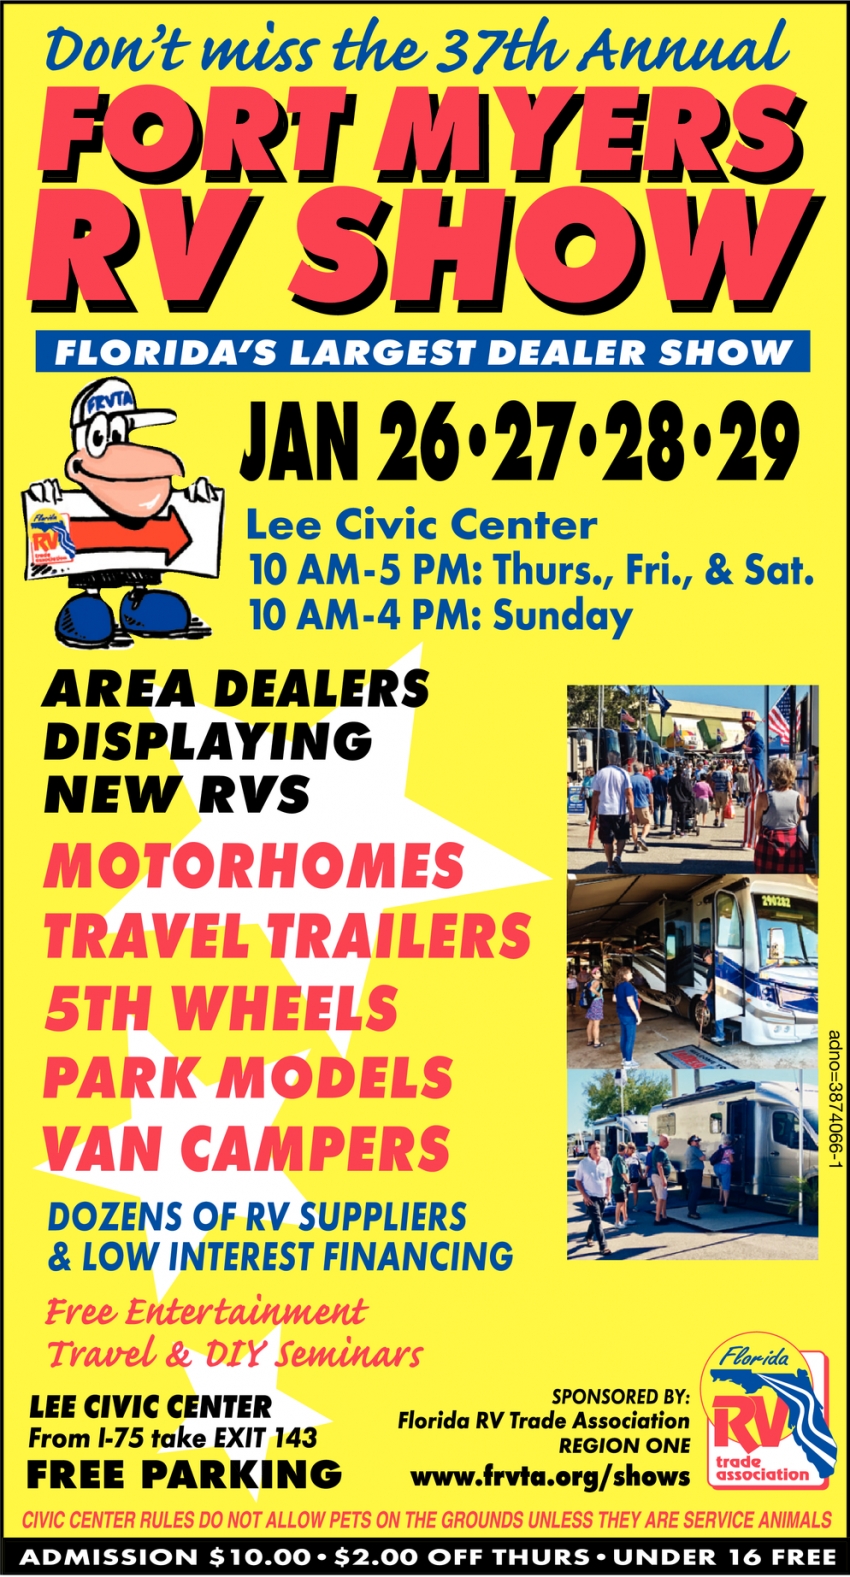 RV Show, Fort Myers RV Show (January 2629, 2023)